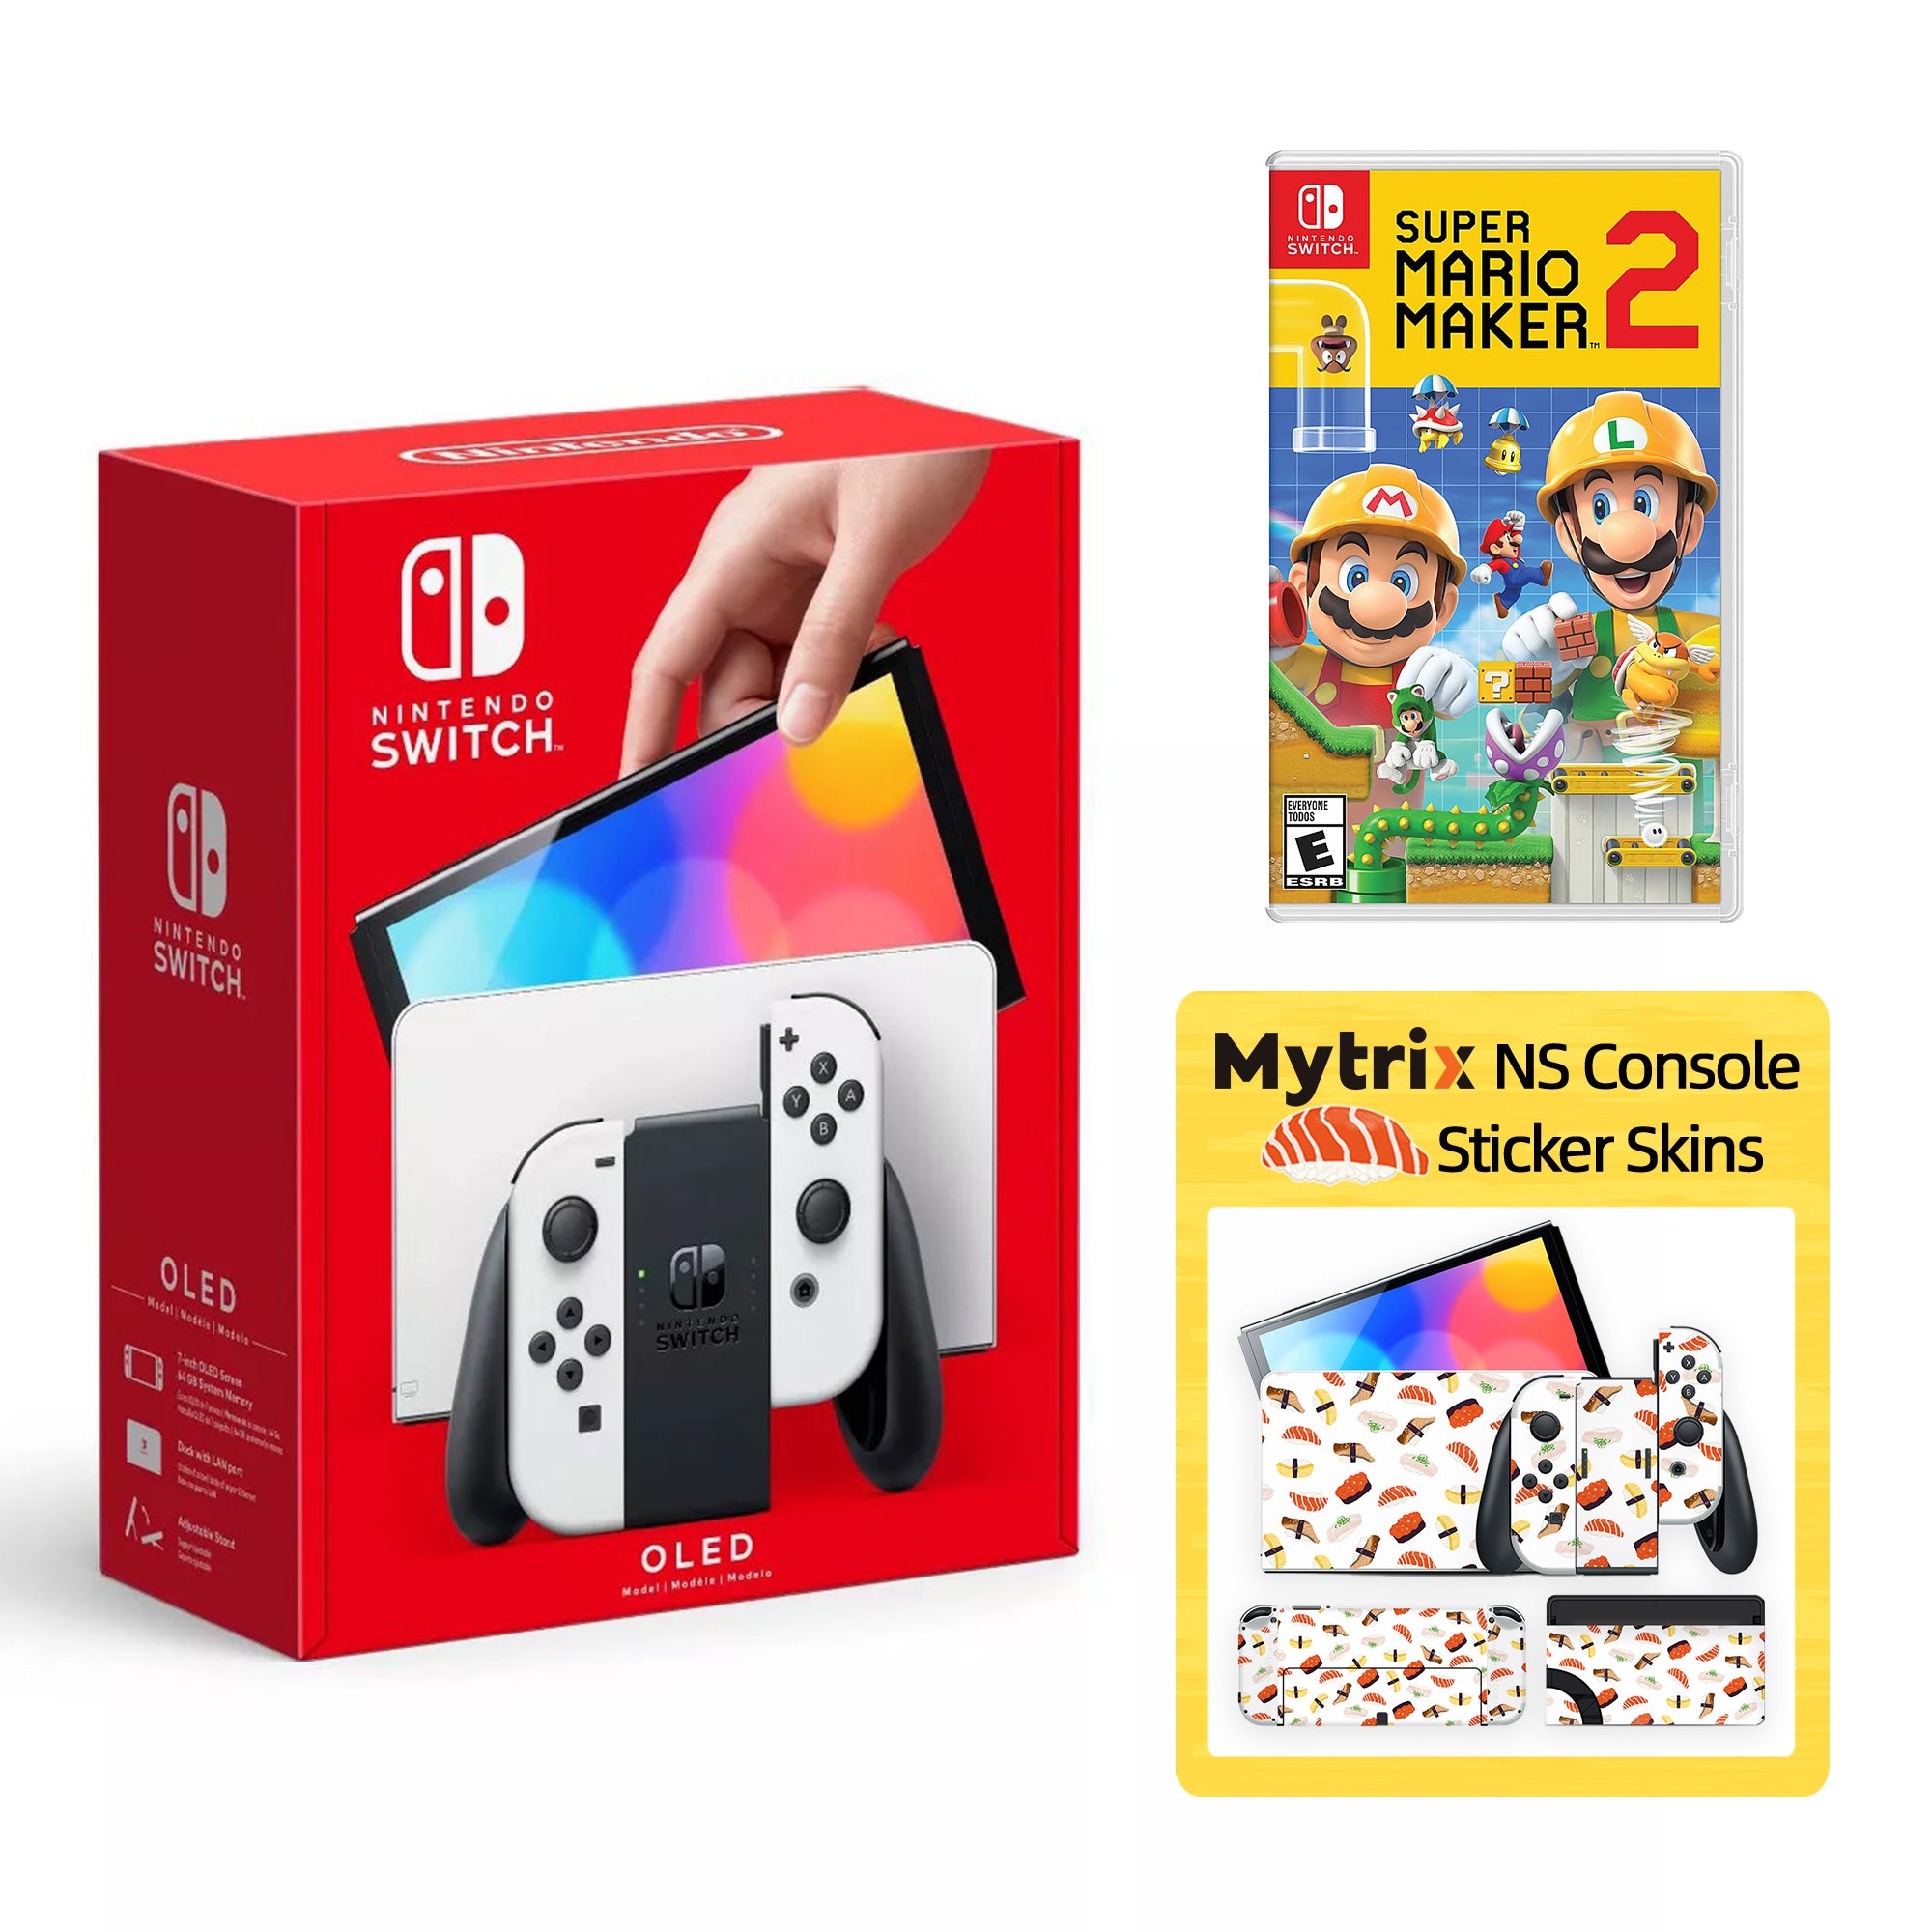 2022 New Nintendo Switch OLED Model Neon Red Blue with Super Mario Maker 2 and Mytrix Full Body Skin Sticker for NS OLED Console, Dock and Joycons - Sakura Pink